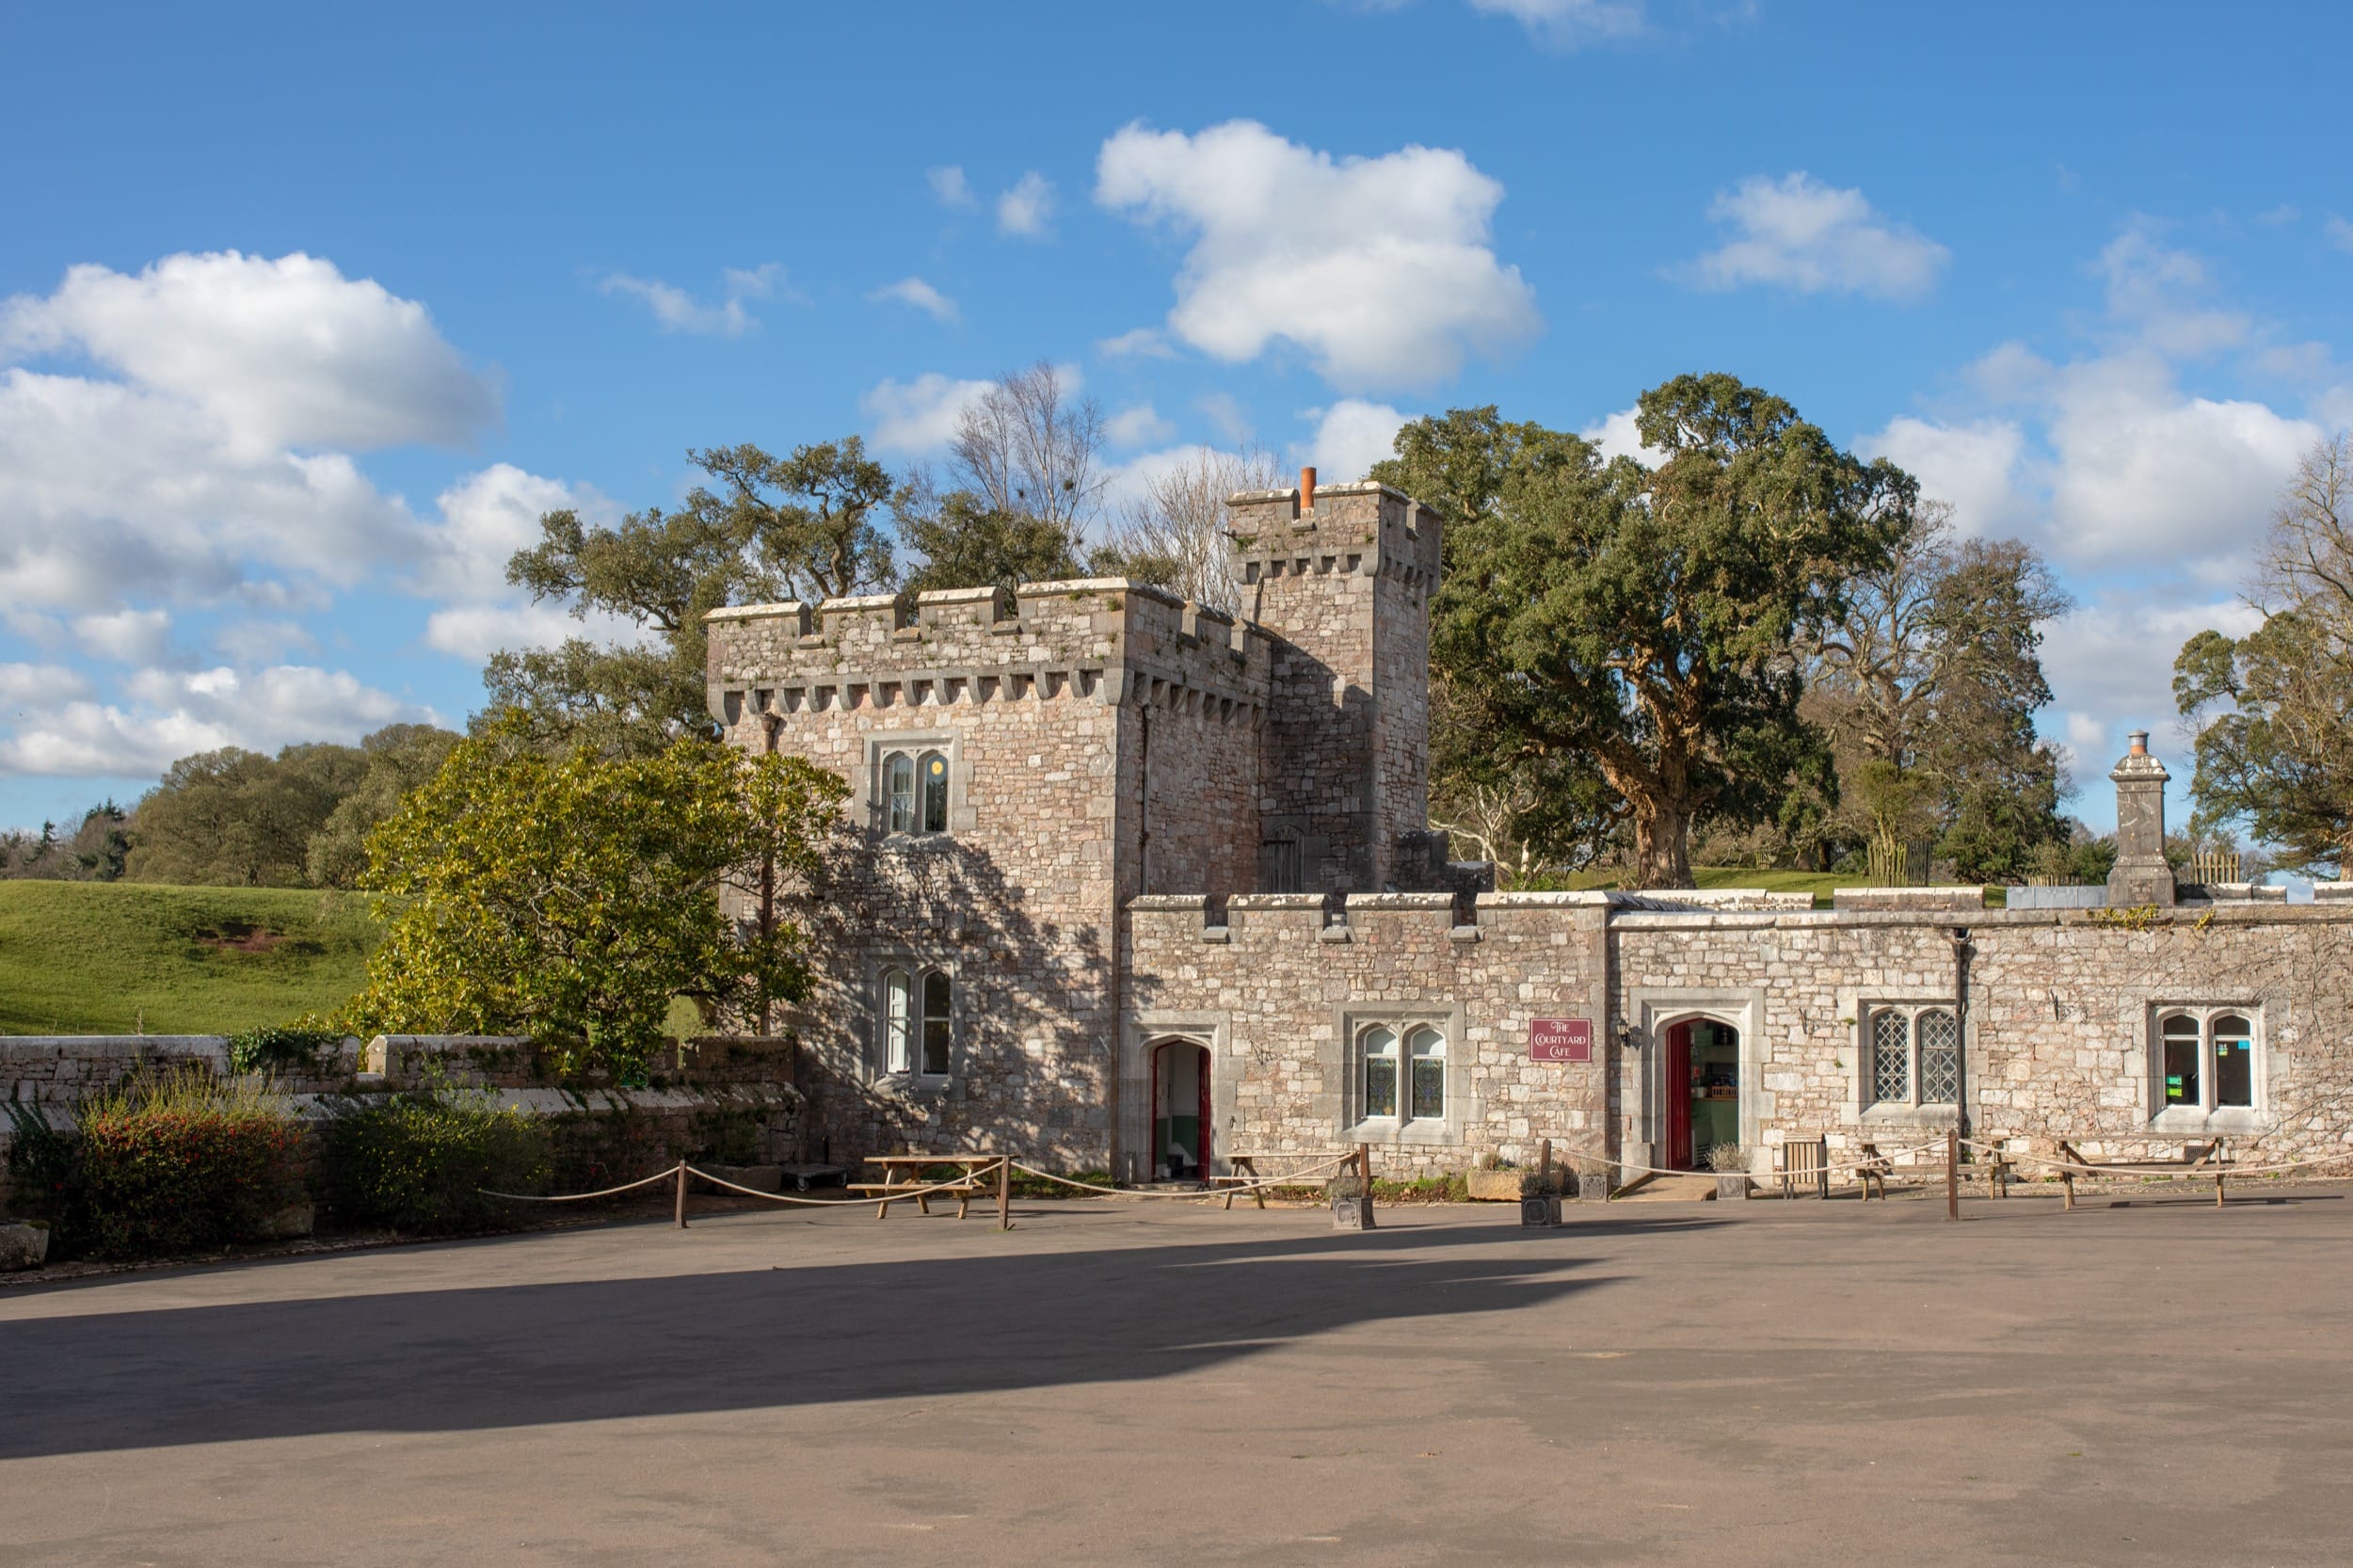 The Courtyard Cafe at Powderham Castle